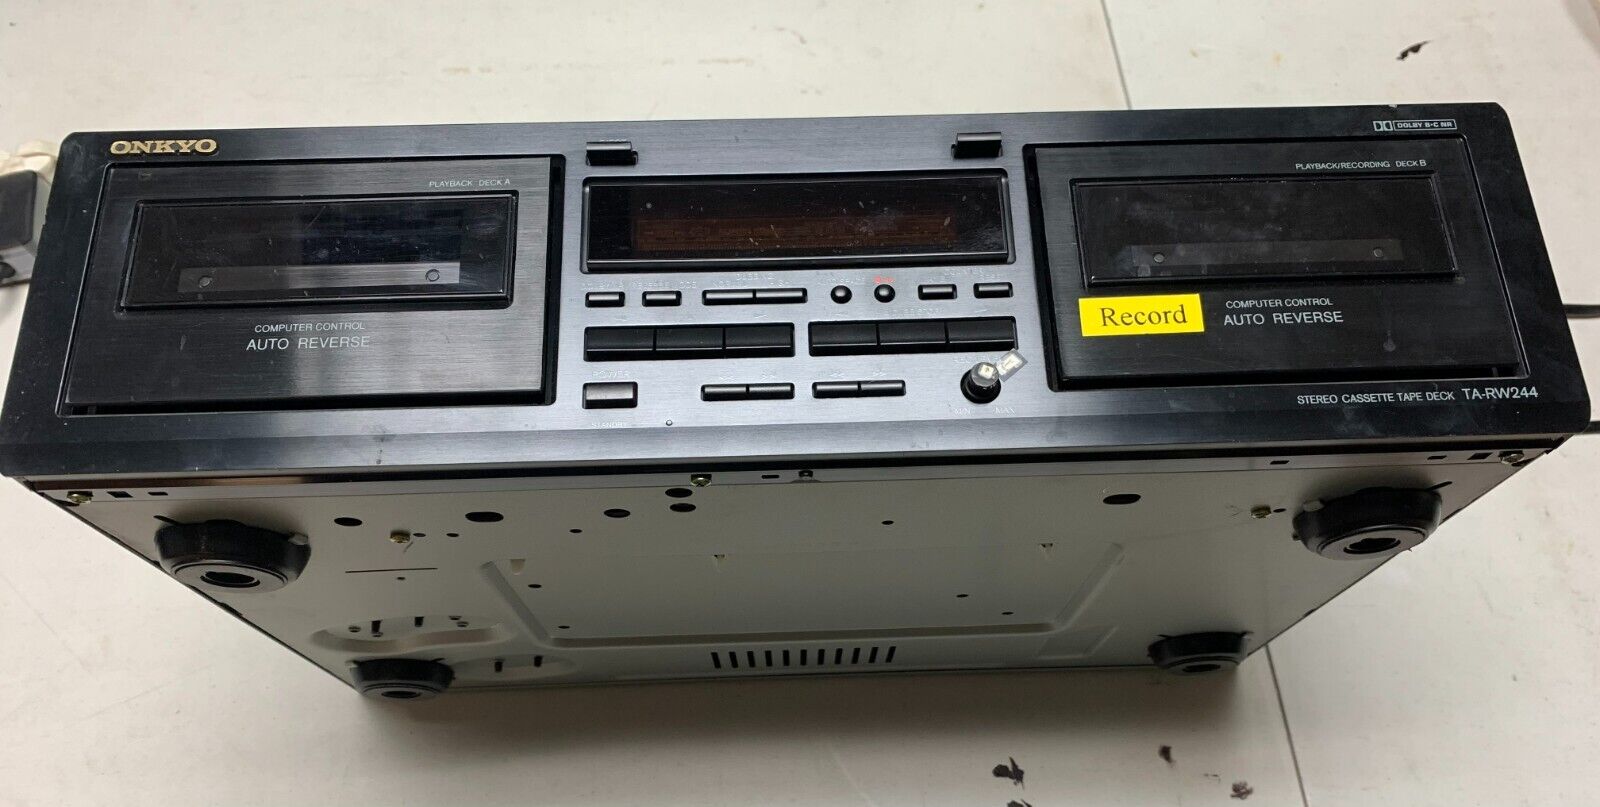 Onkyo Ta-rw244 Stereo Cassette Player Recorder Dual Double Tape Deck